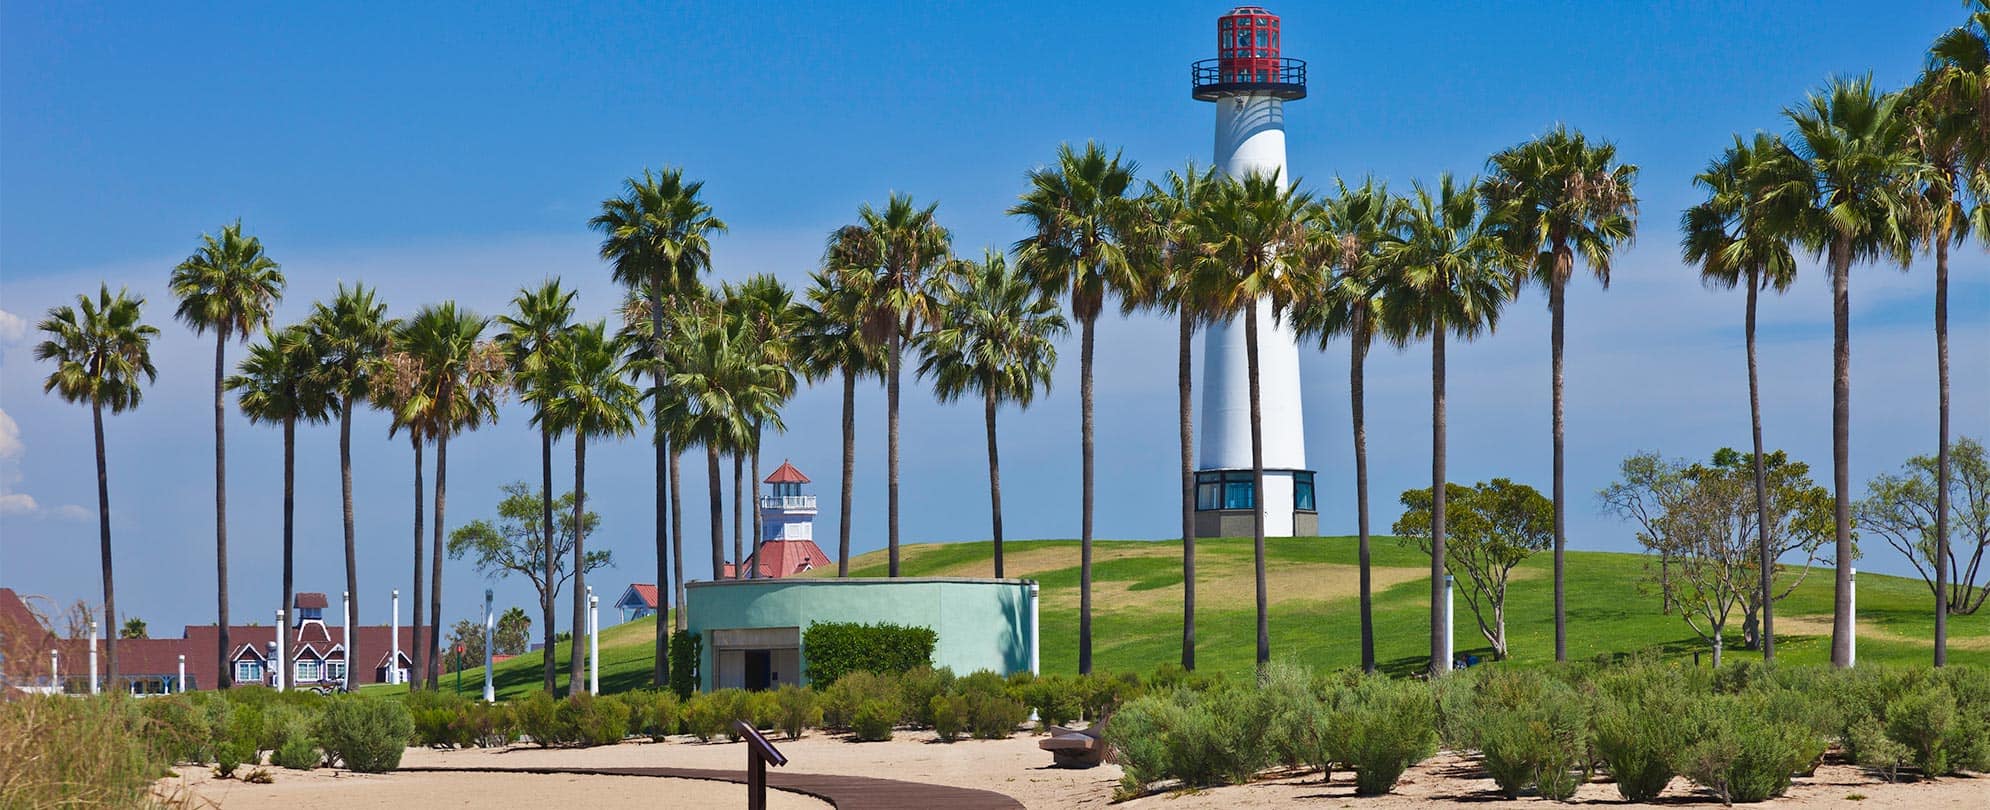 A lighthouse behind a row of palm trees at the Long Beach Harbor in California.